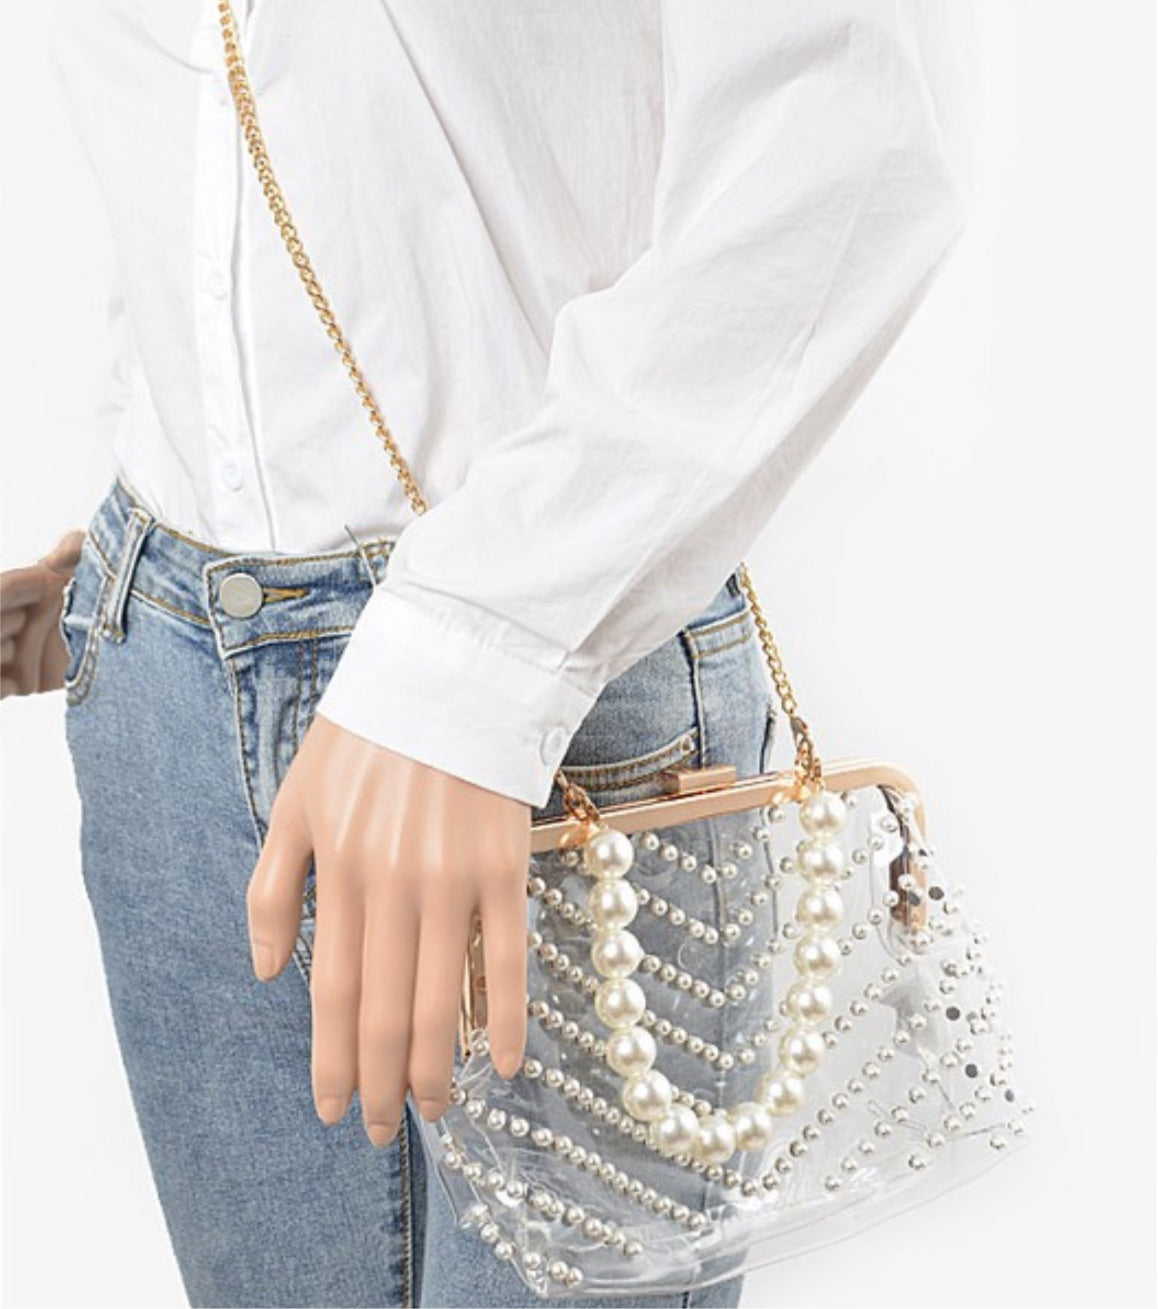 Pearl Studded Clutch